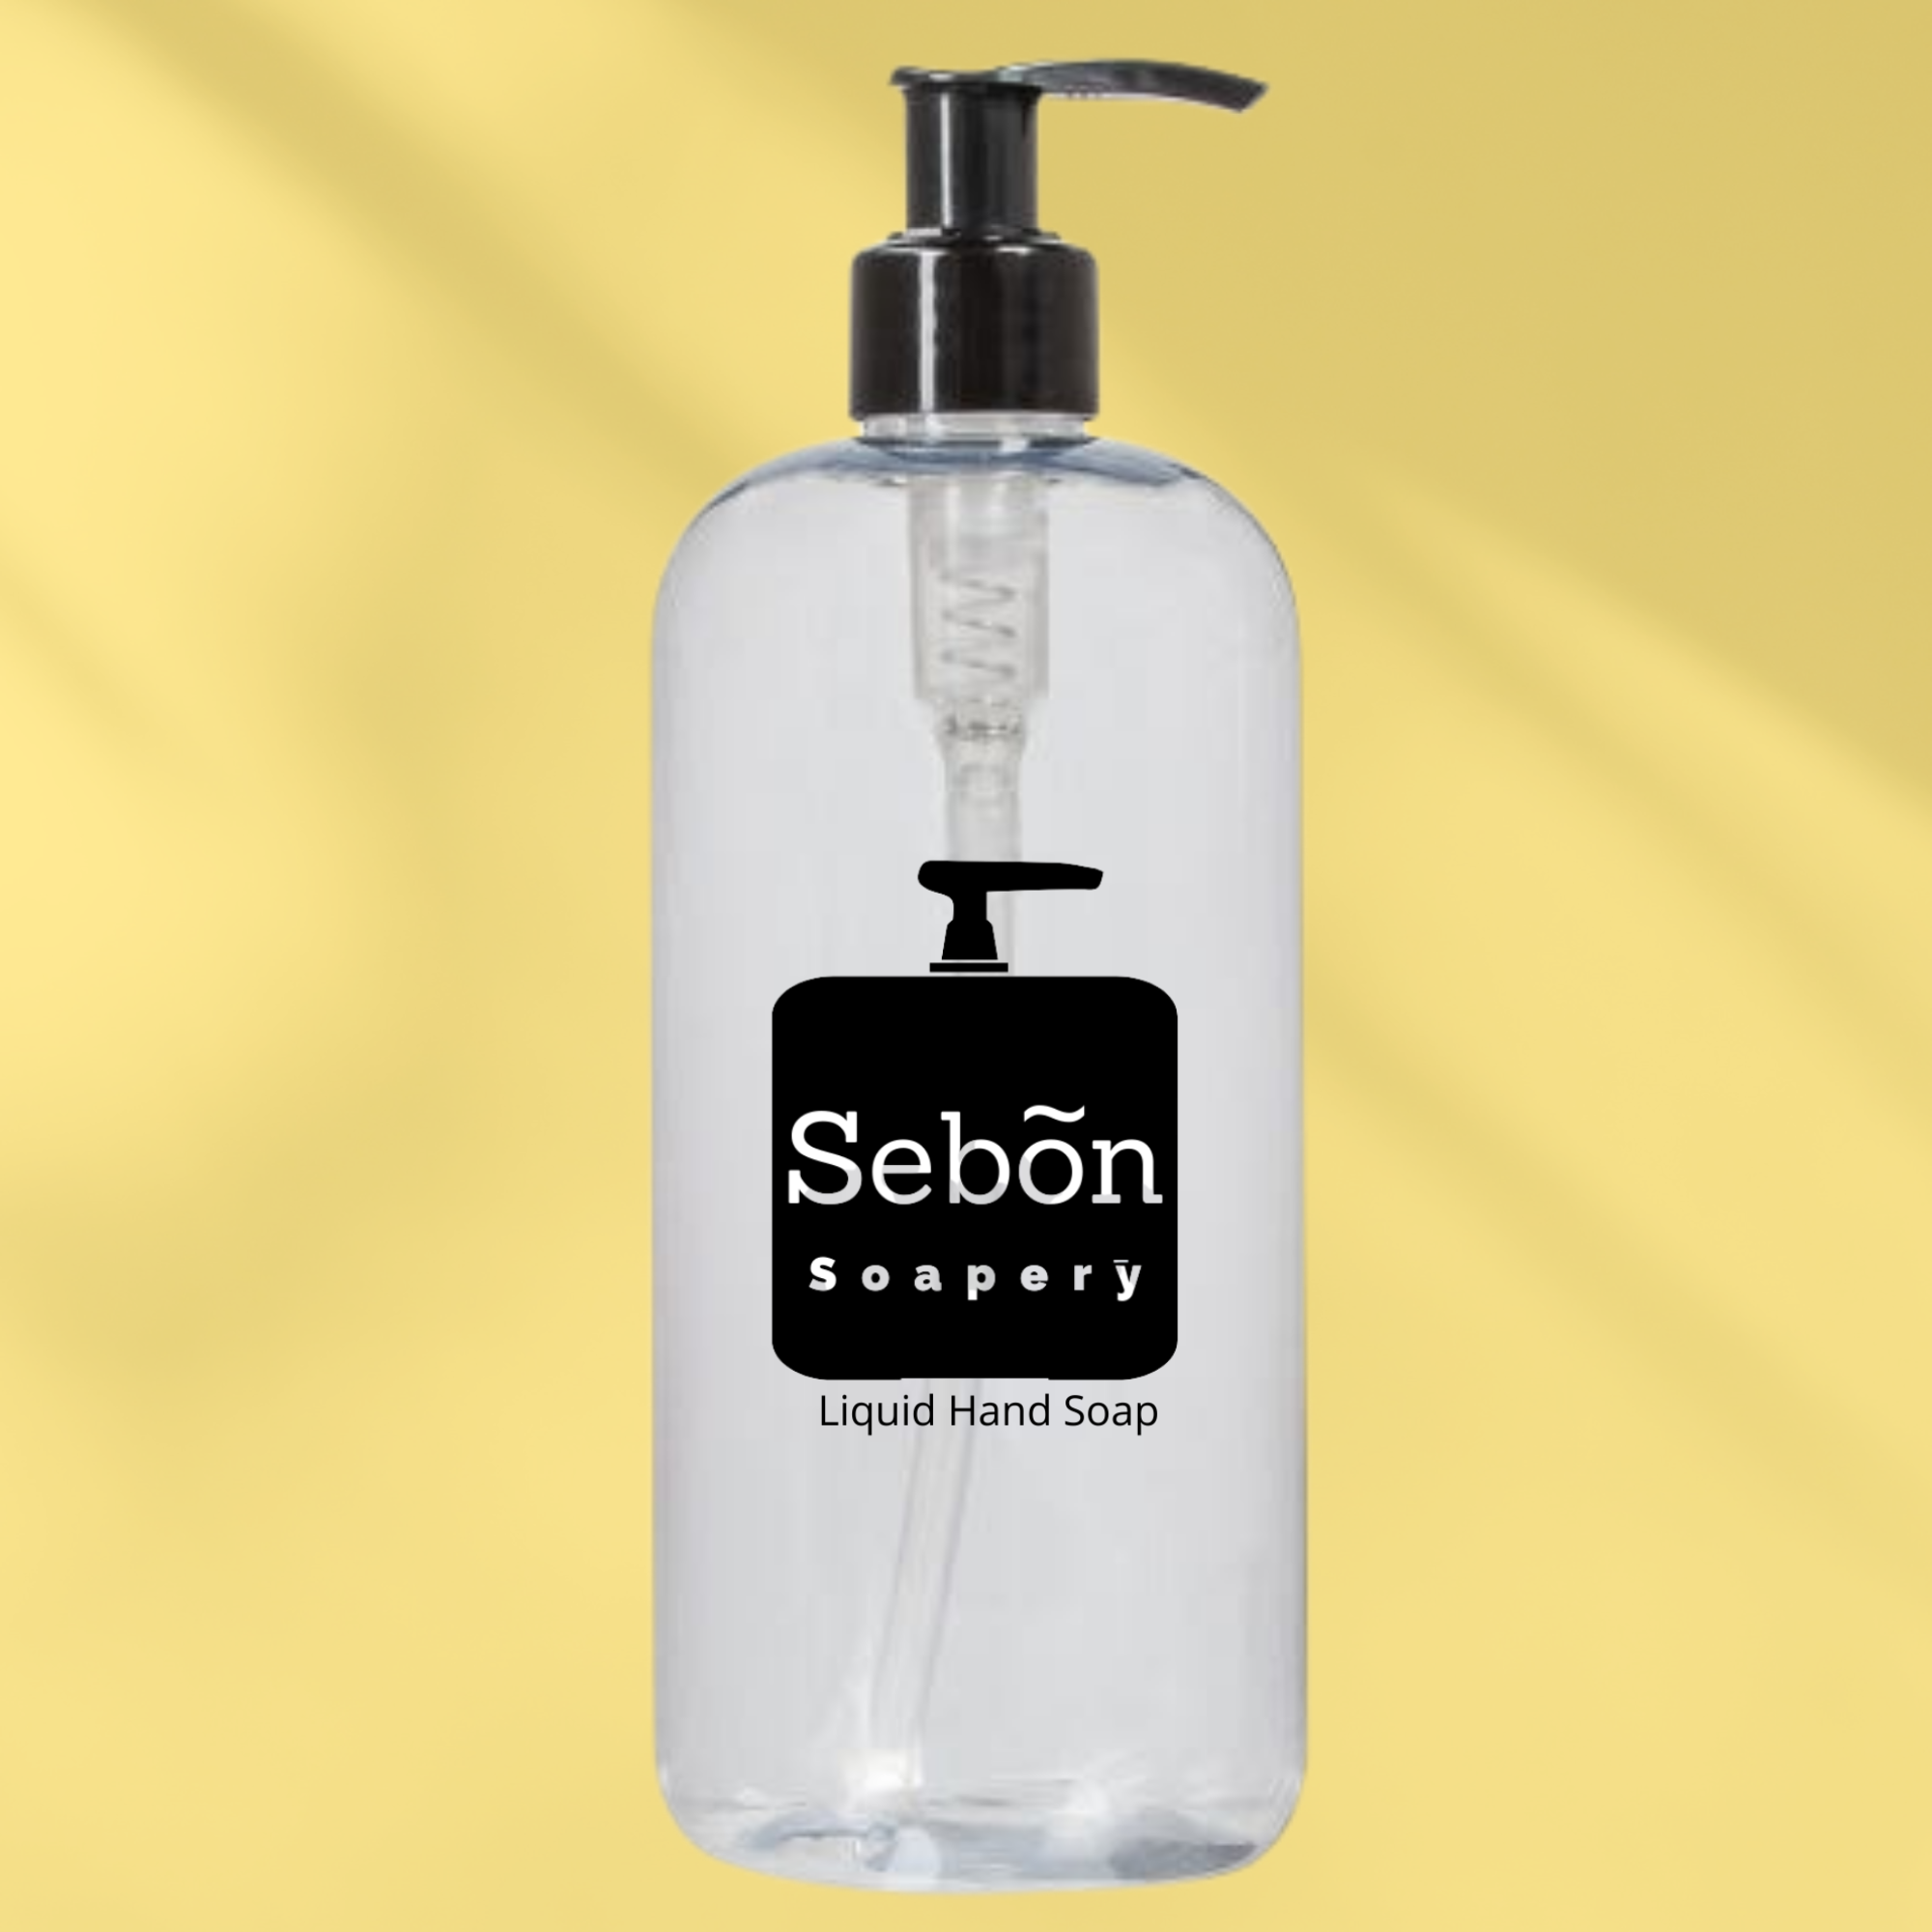 Sebon Clove & Patchouli Scented Liquid Hand Soap with Olive Oil